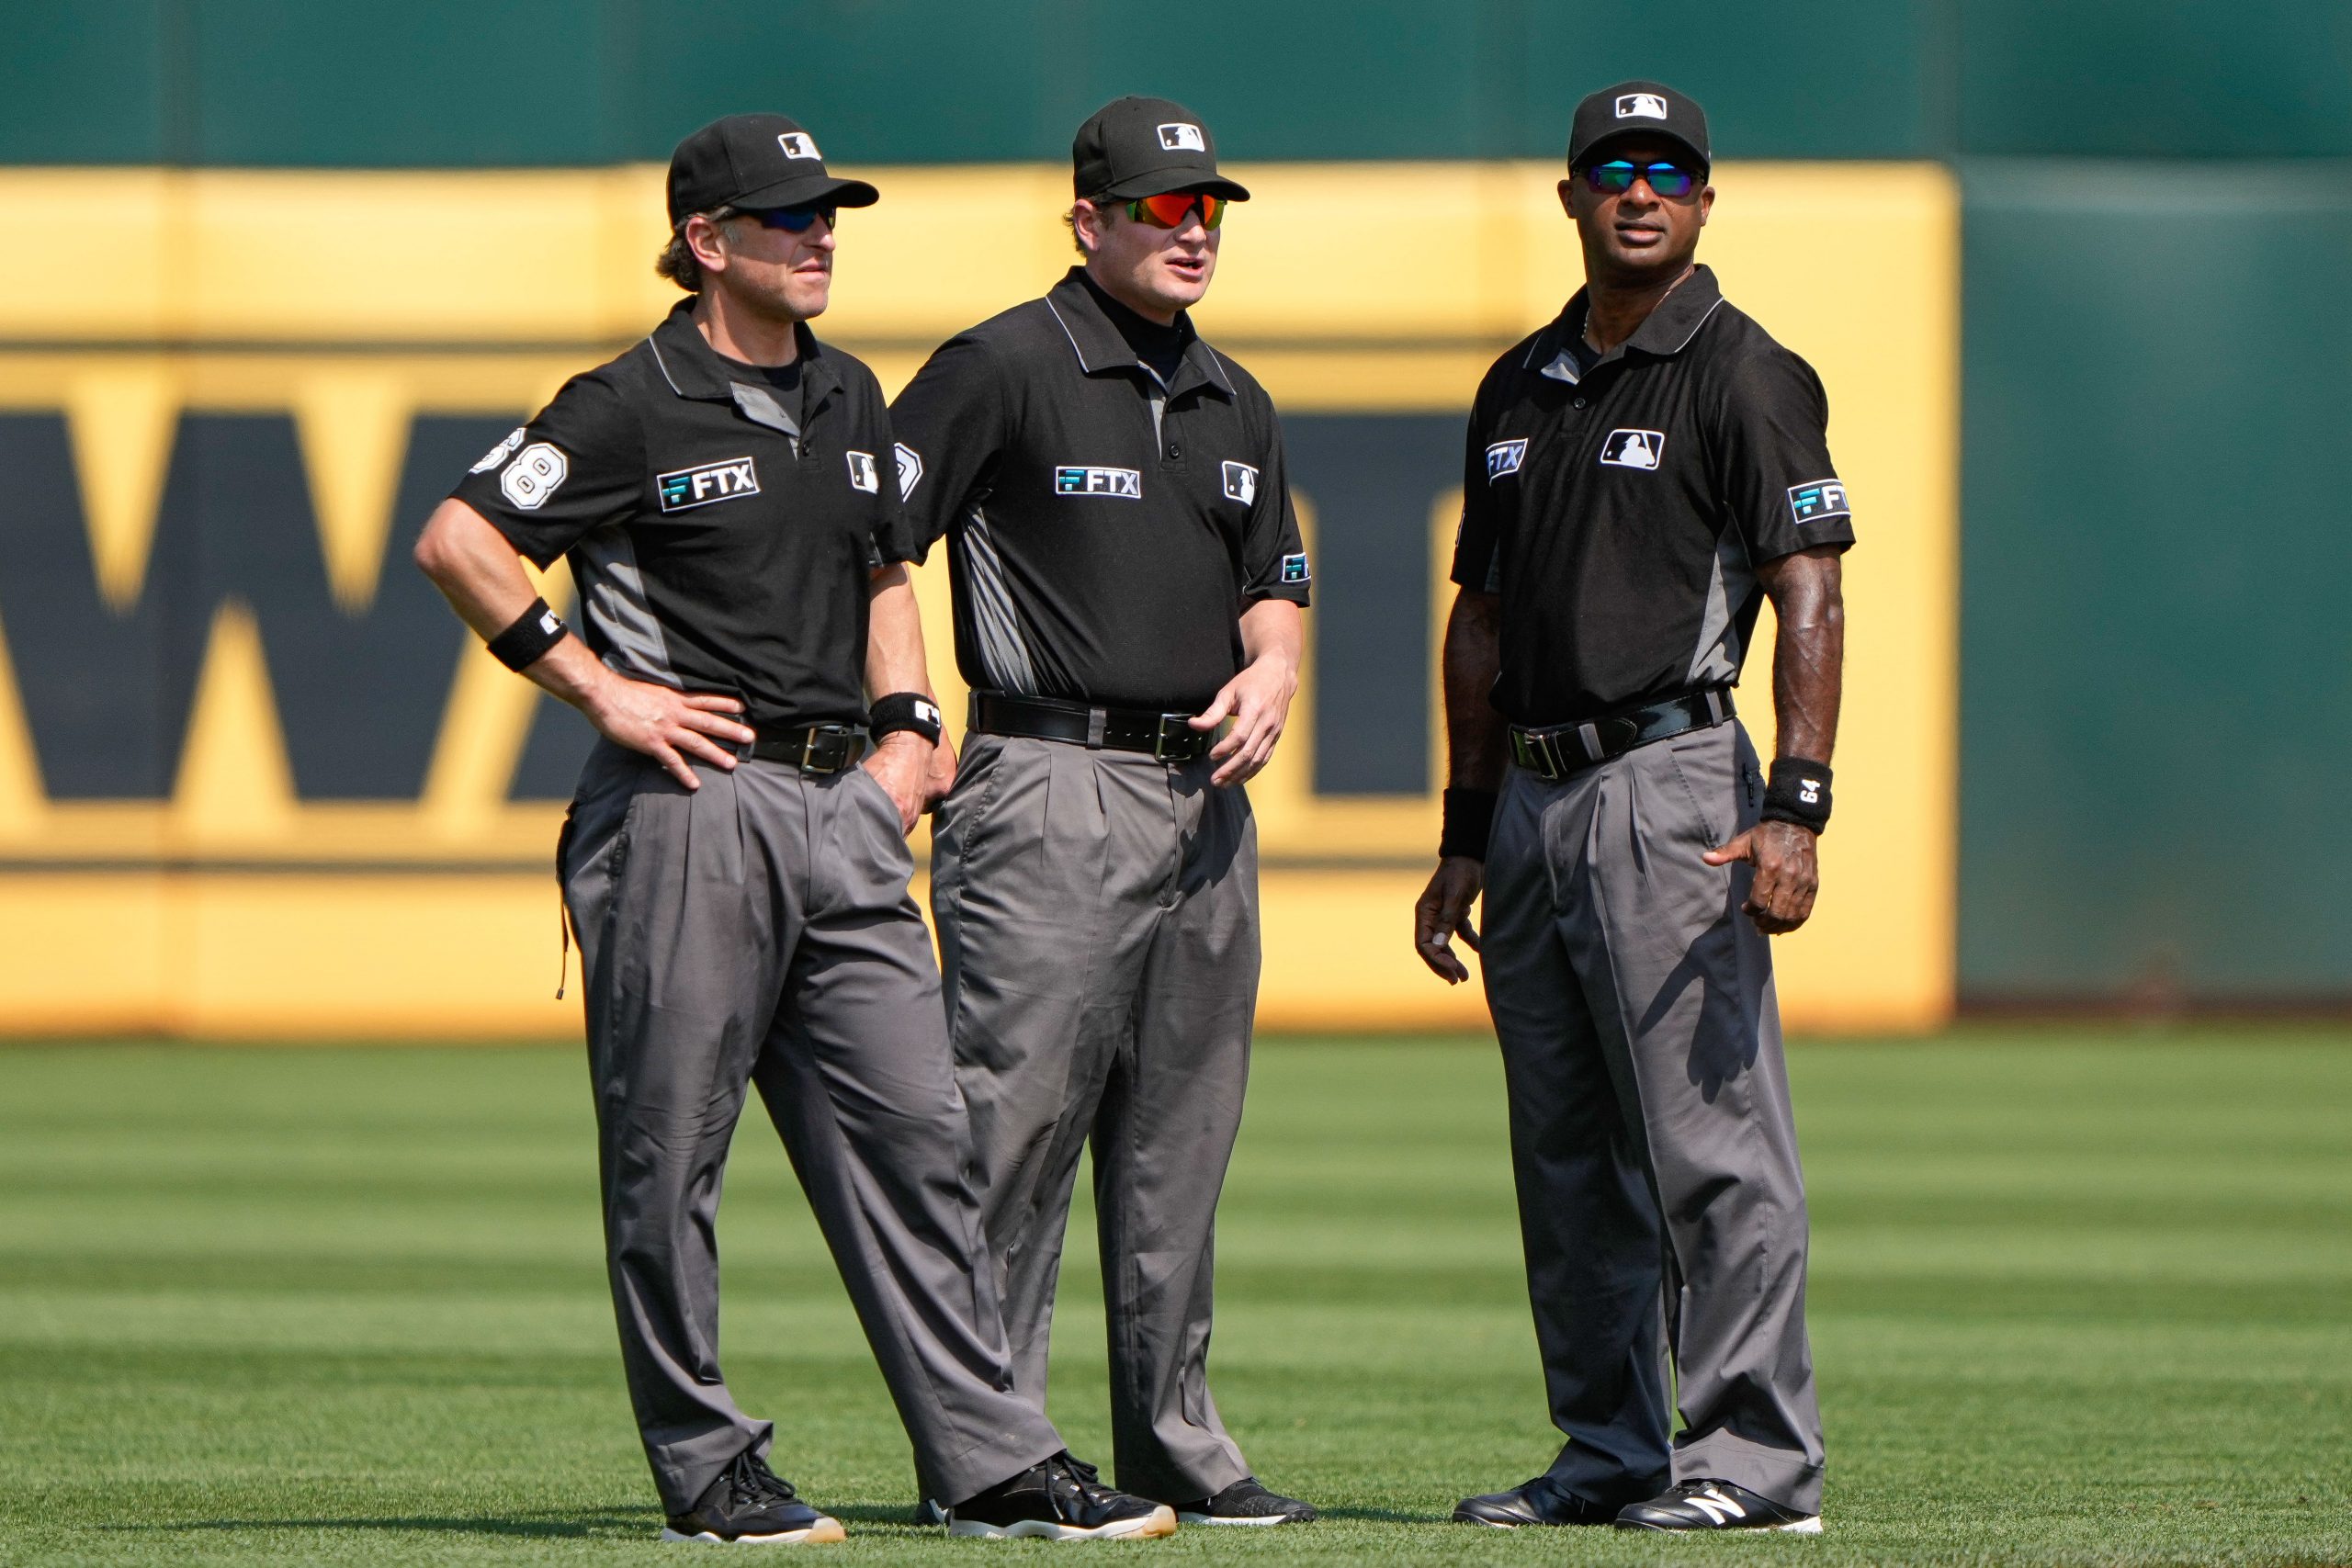 MLB Will Drop FTX Patches For Umpires In 2023, But Partnership